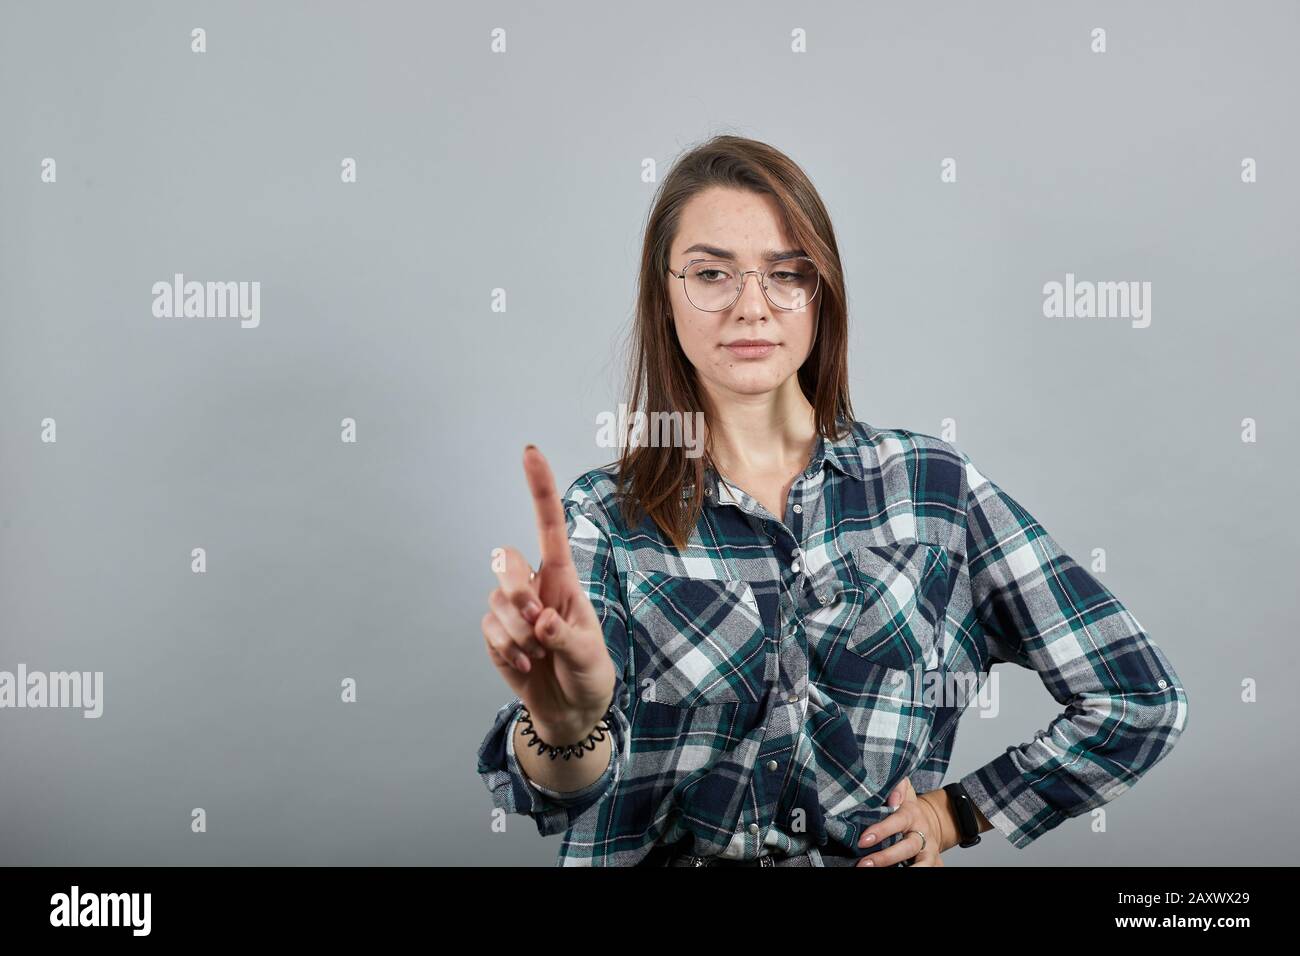 woman in glasses counteracts by shaking her index finger, a sign of disagreement Stock Photo